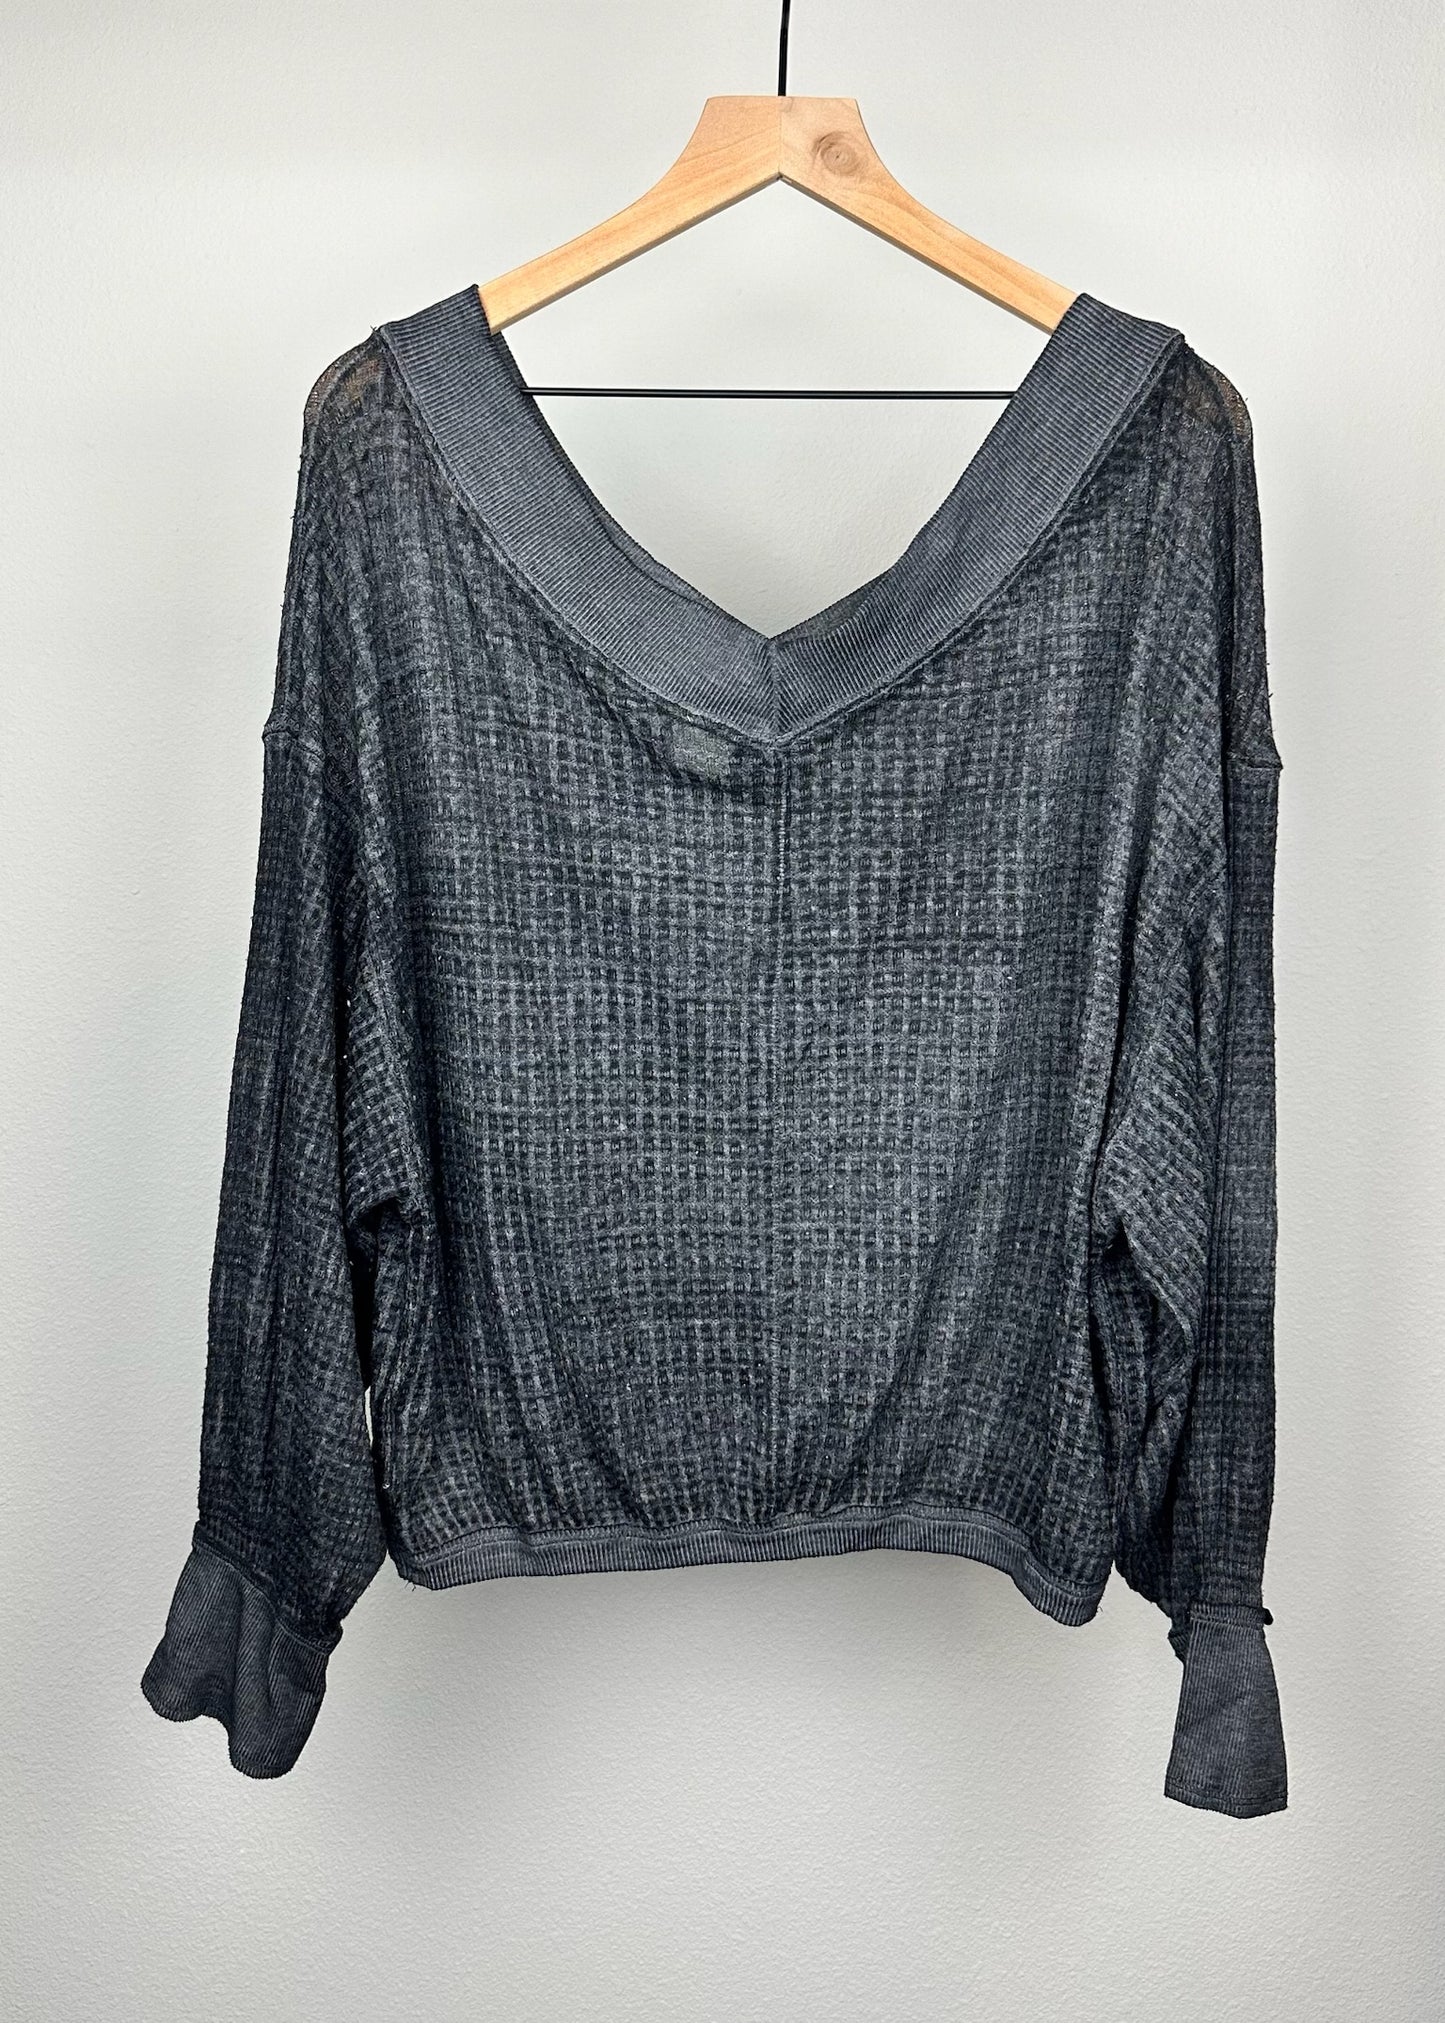 Grey Oversized Cardigan By We The Free